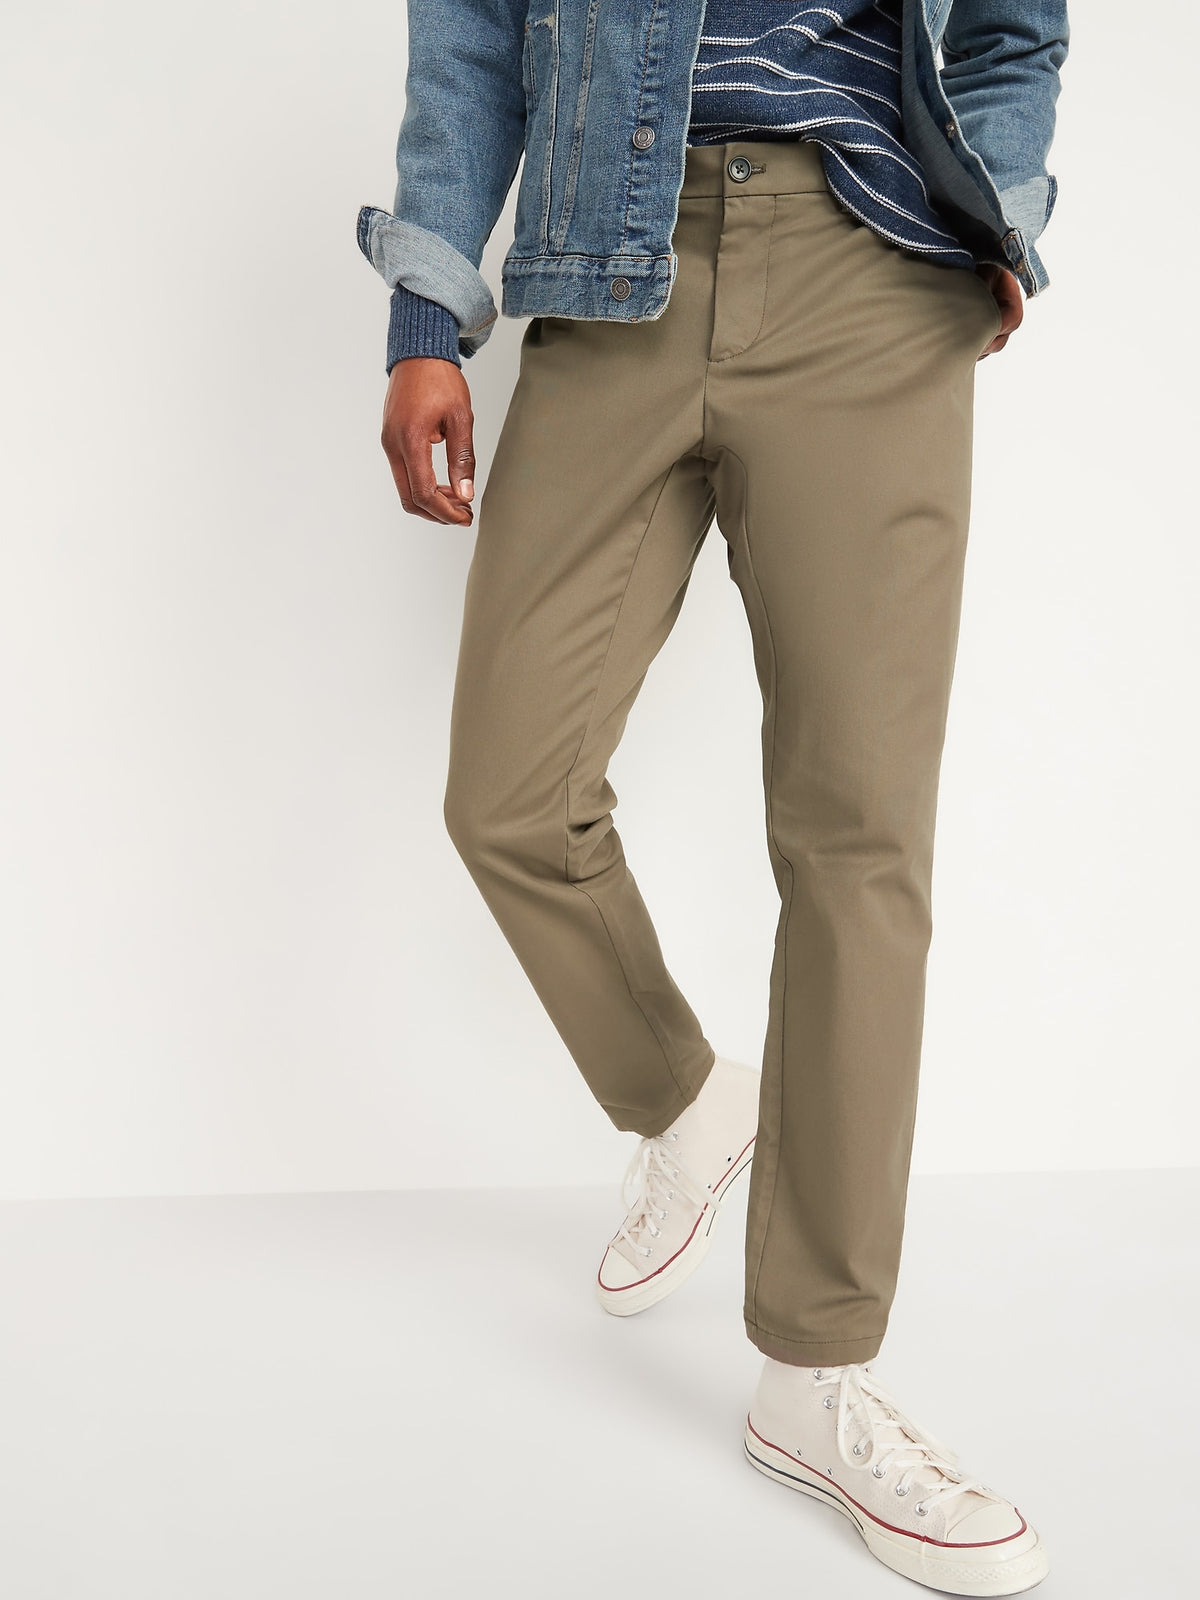 Athletic Ultimate Built-In Flex Chino Pants For Men - Old Navy Philippines